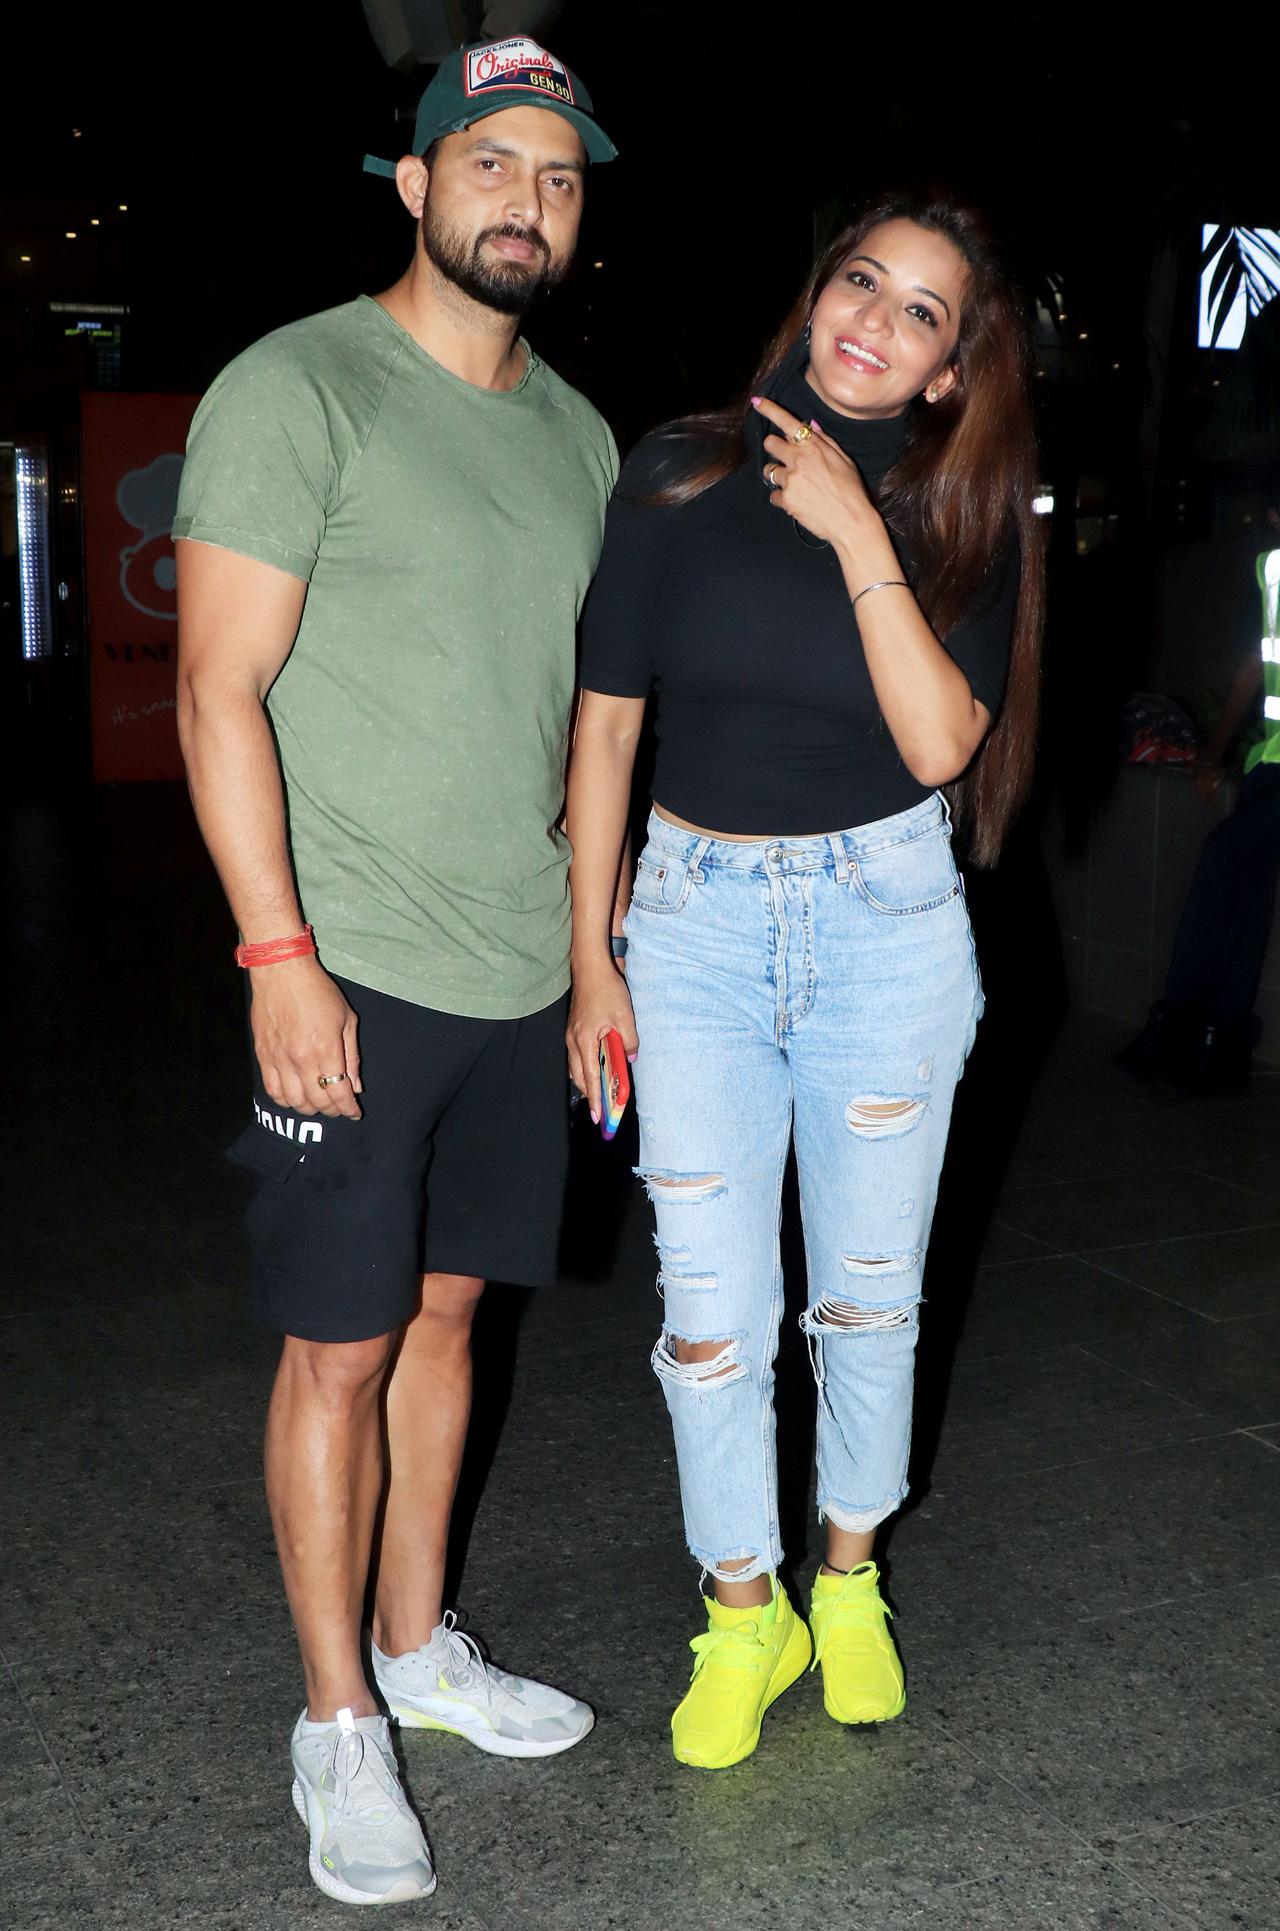 Bhojpuri and television star Monalisa was spotted with her husband Vikraant Singh were spotted at the Mumbai airport. The couple returned from their holiday in Goa.